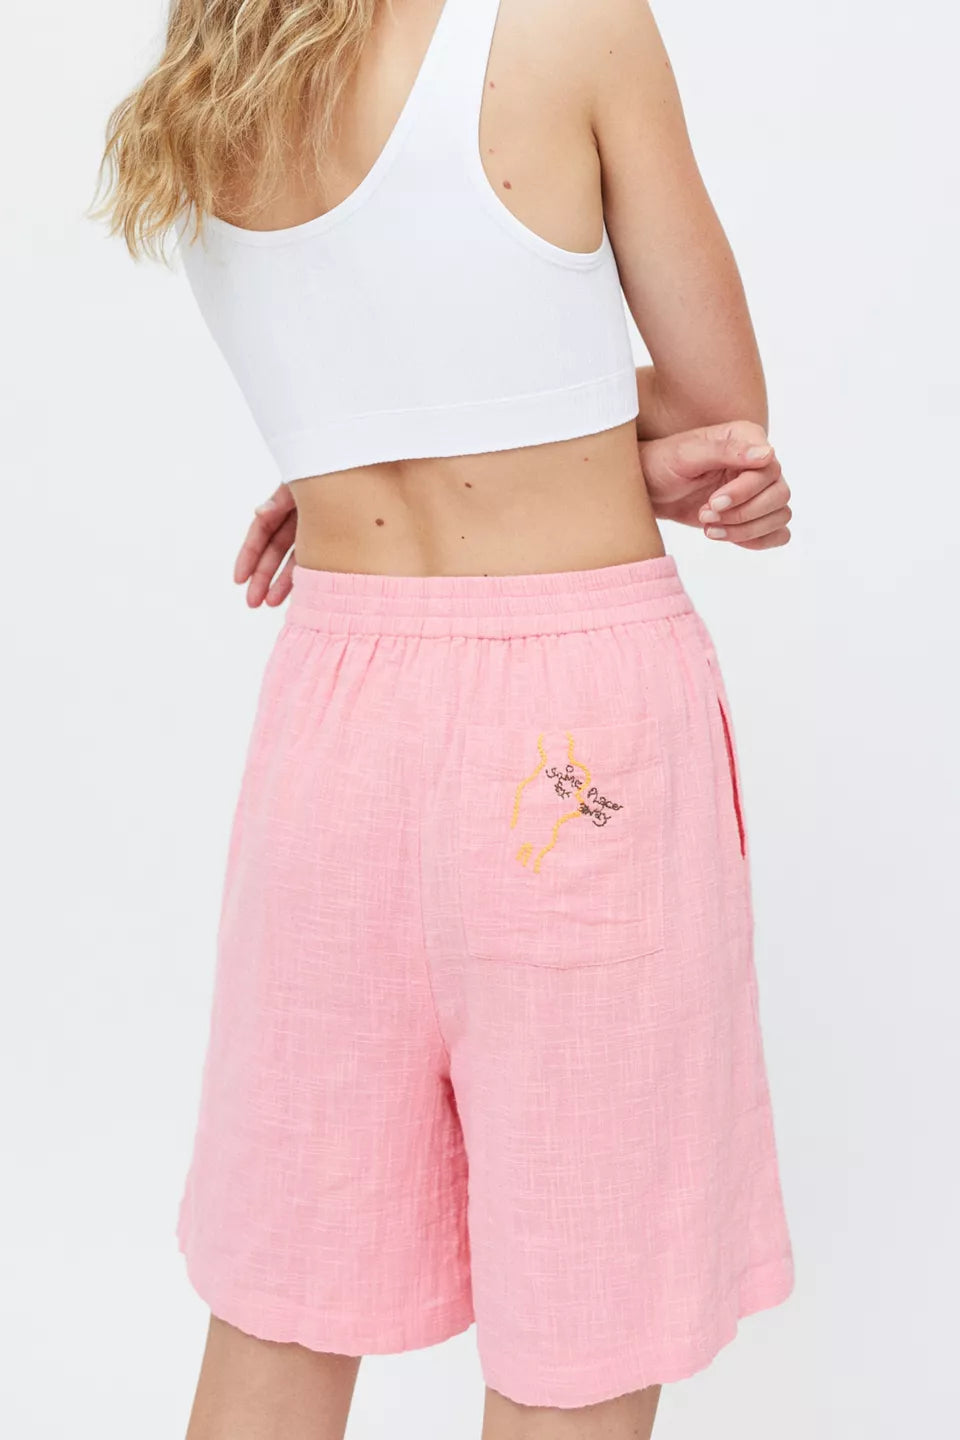 Urban Outfitters UO Vacation Bermuda Shorts